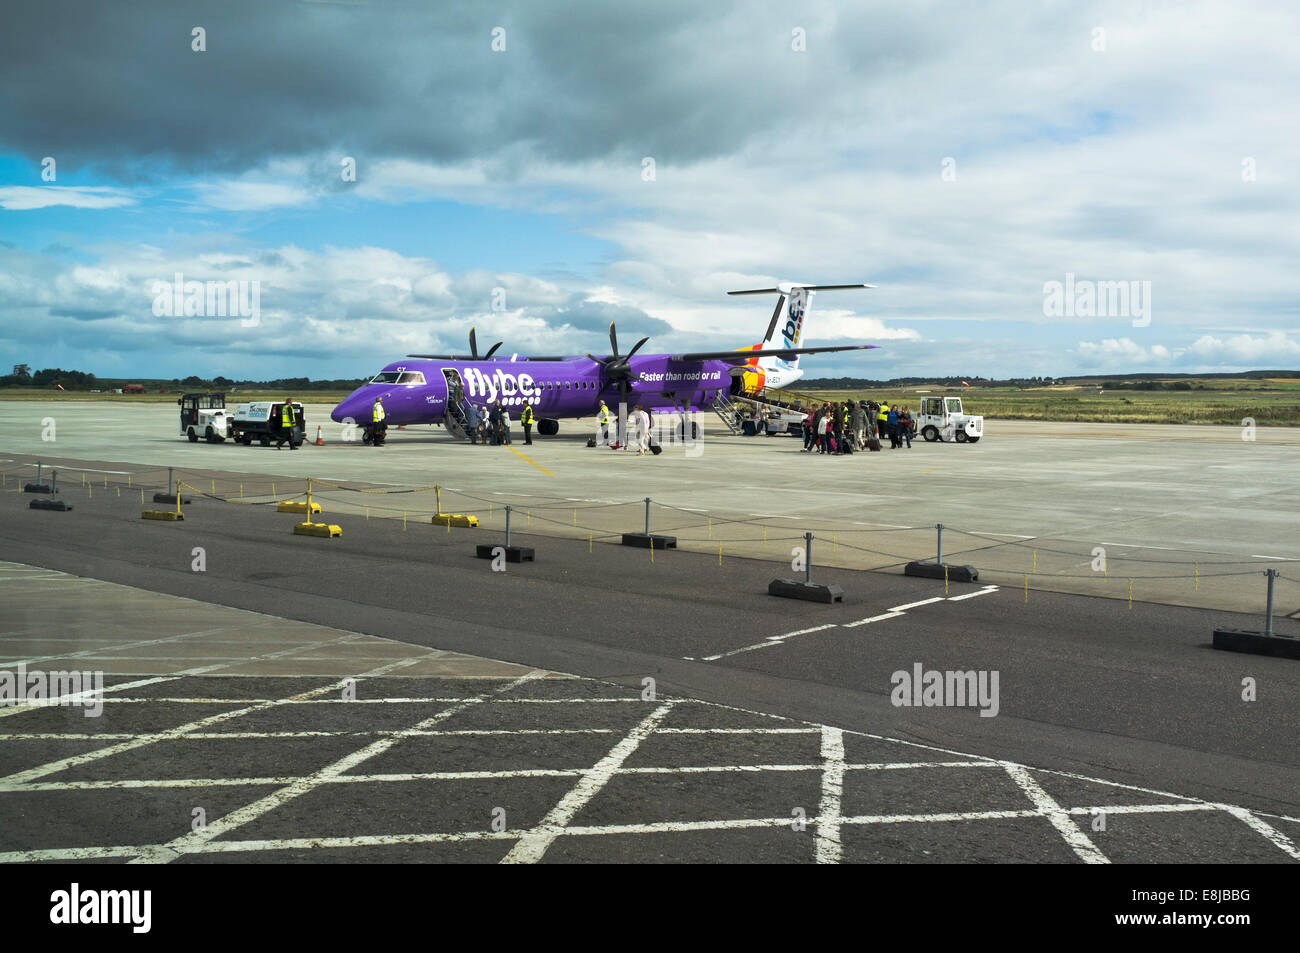 dh  INVERNESS AIRPORT INVERNESSSHIRE Flybe aircraft Internal flight discharging passengers airplane q400 dash 8 Stock Photo